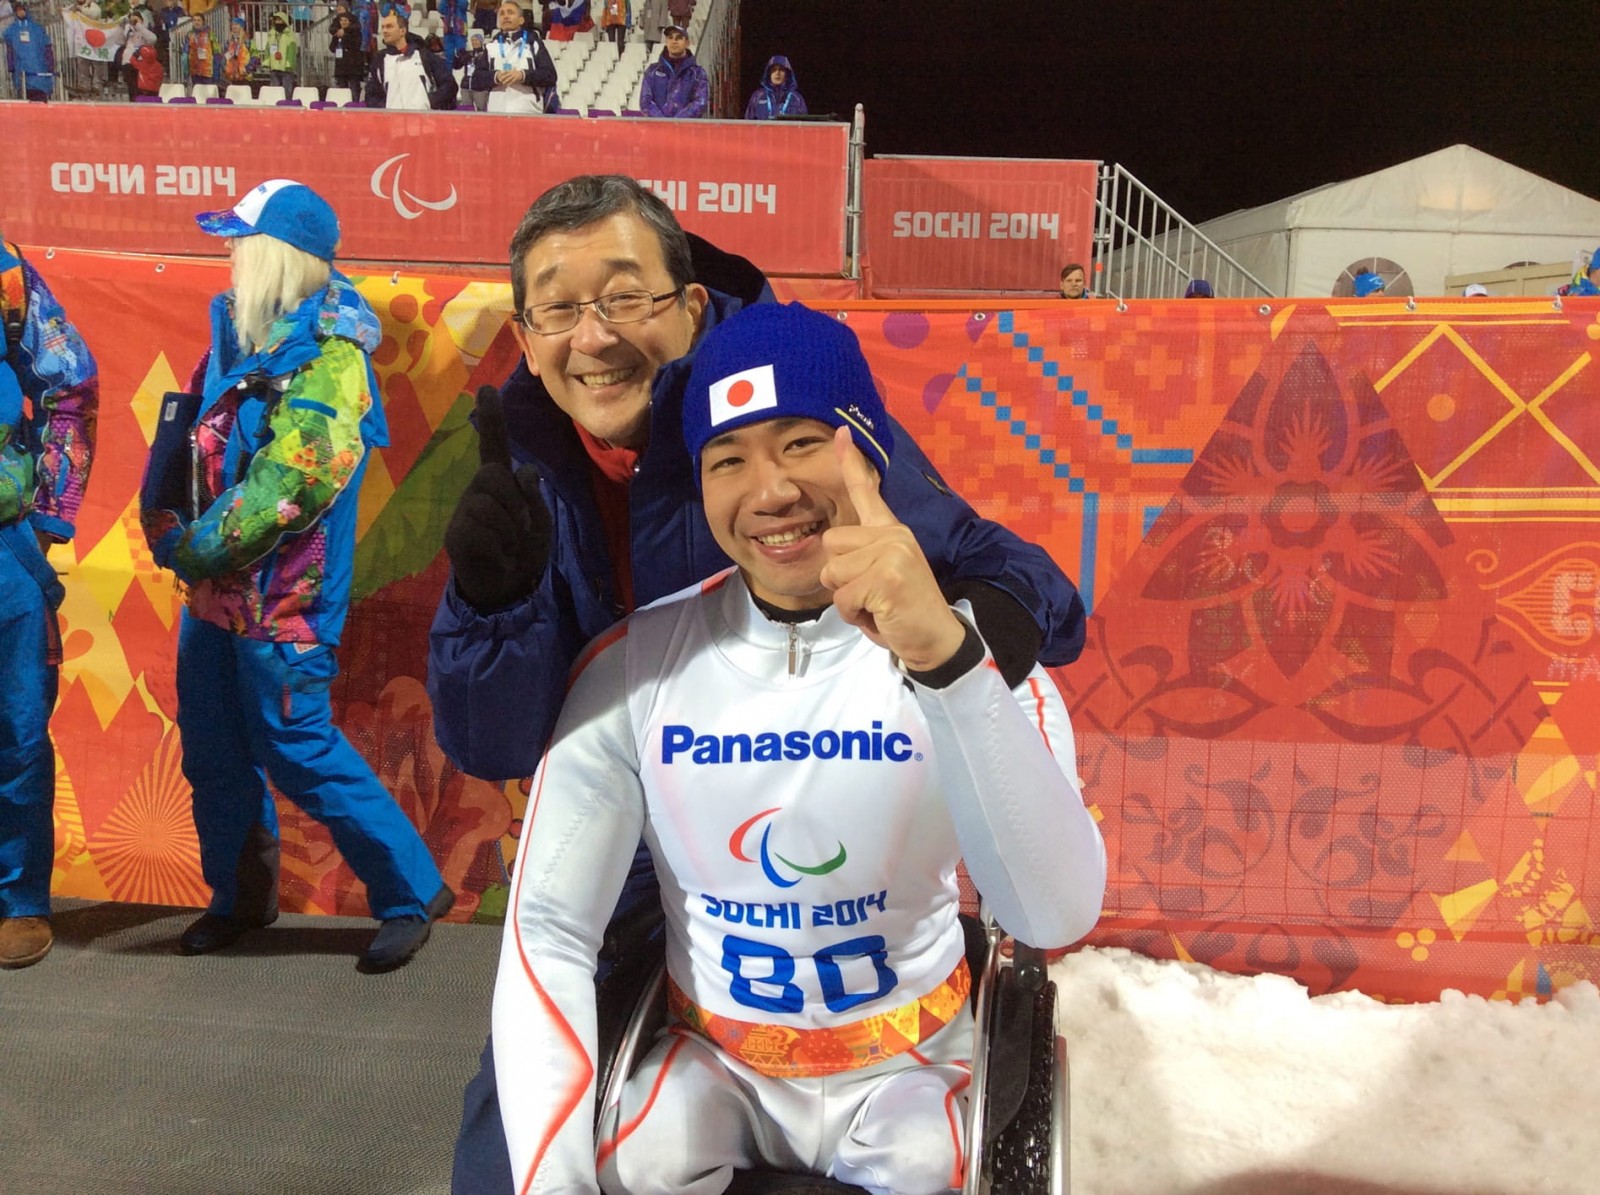 It was from personal experience that Yasushi Yamawaki (shown with para-alpine skiing gold medalist Takeshi Suzuki) realized that the feats of para-athletes could become a key factor in building a vibrant, coexistence society. ©Photo Kishimoto